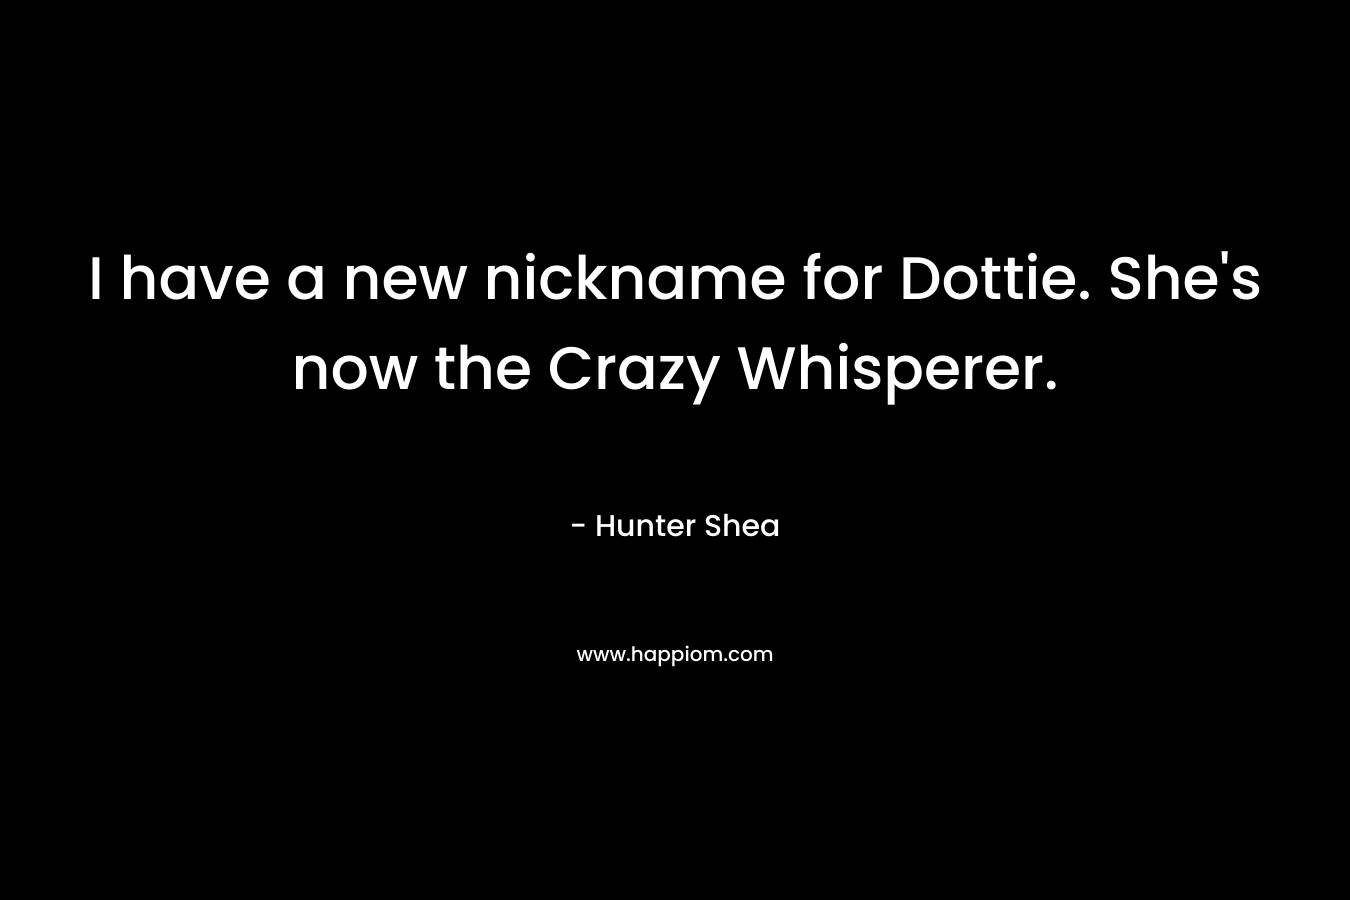 I have a new nickname for Dottie. She's now the Crazy Whisperer.